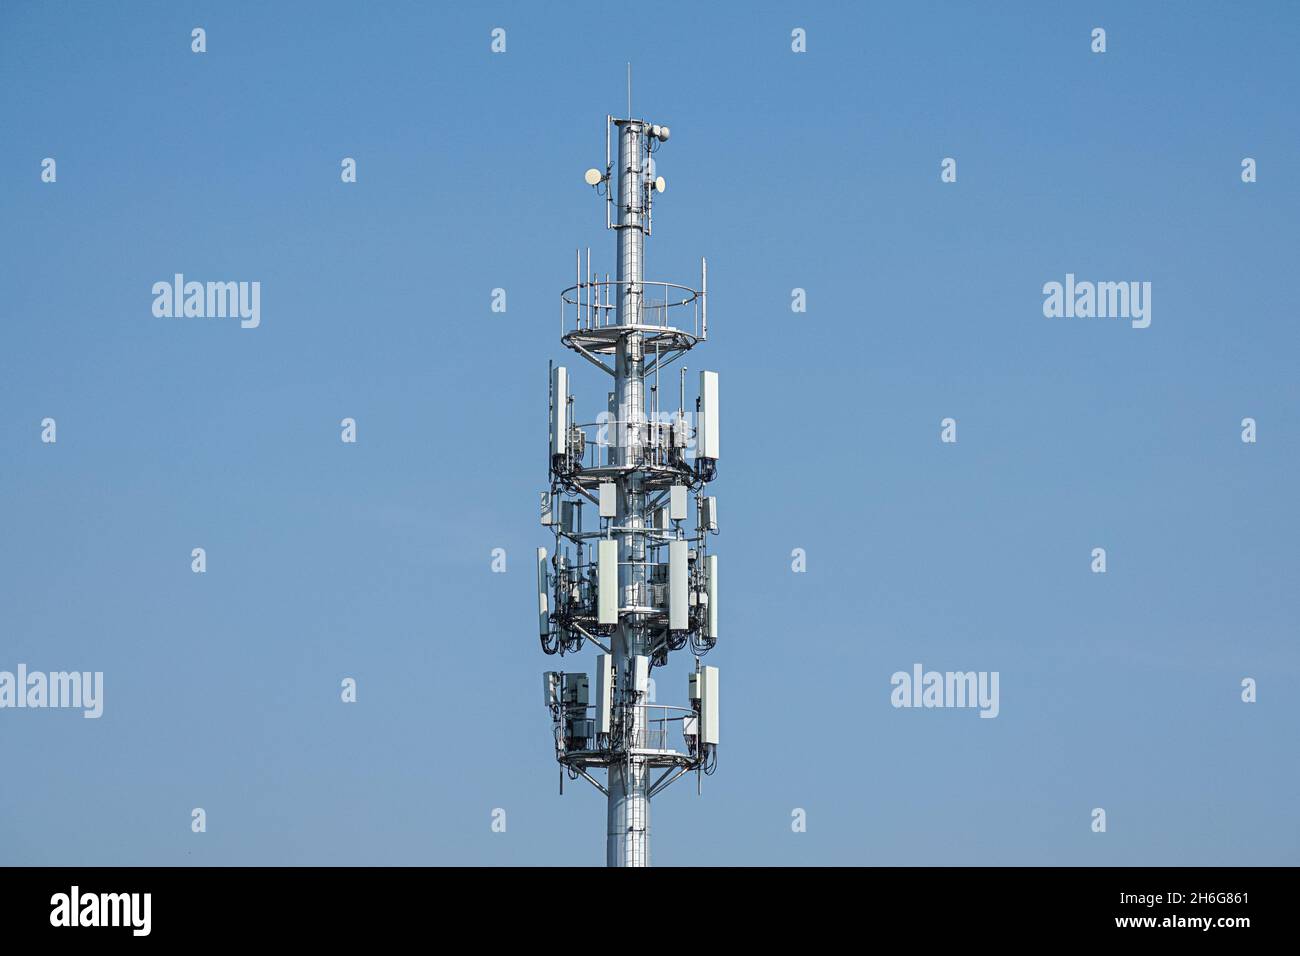 Cell phone, mobile phone telecommunication tower with antennas on blue sky Stock Photo